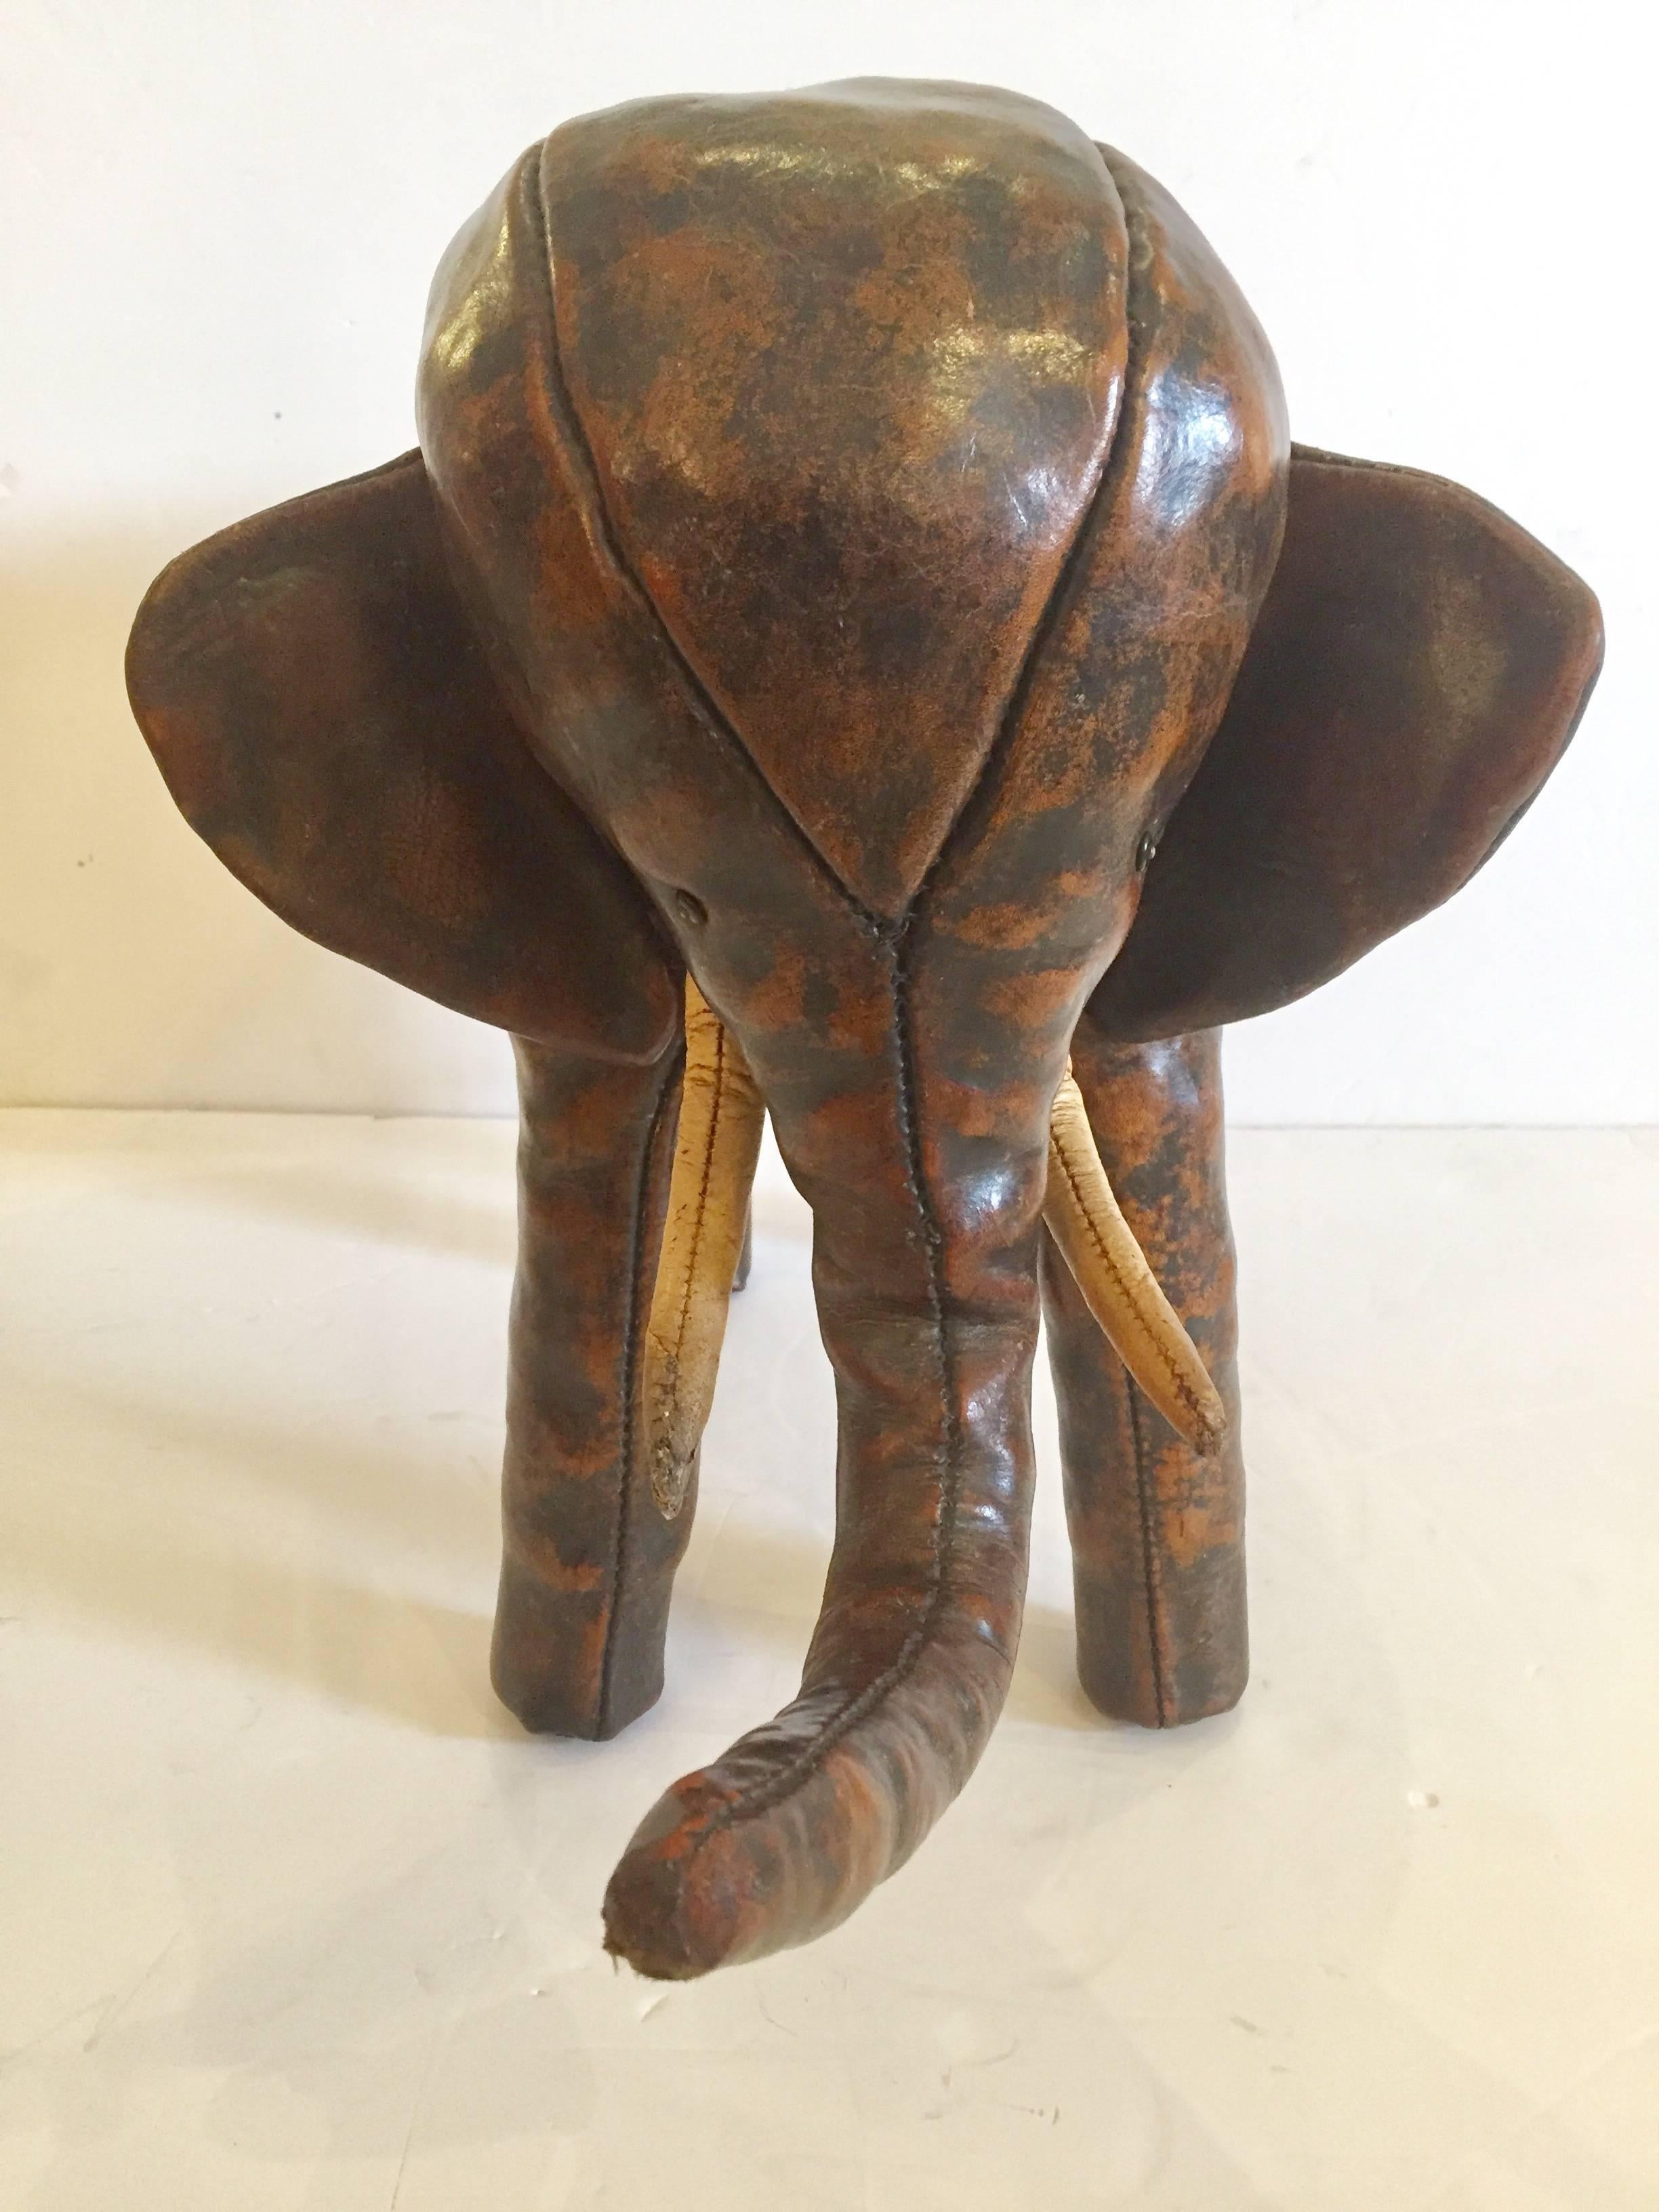 Fabulous vintage leather elephant foot stool by Dimitri Omersa for Abercrombie and Fitch. Incredible patina and condition.
   